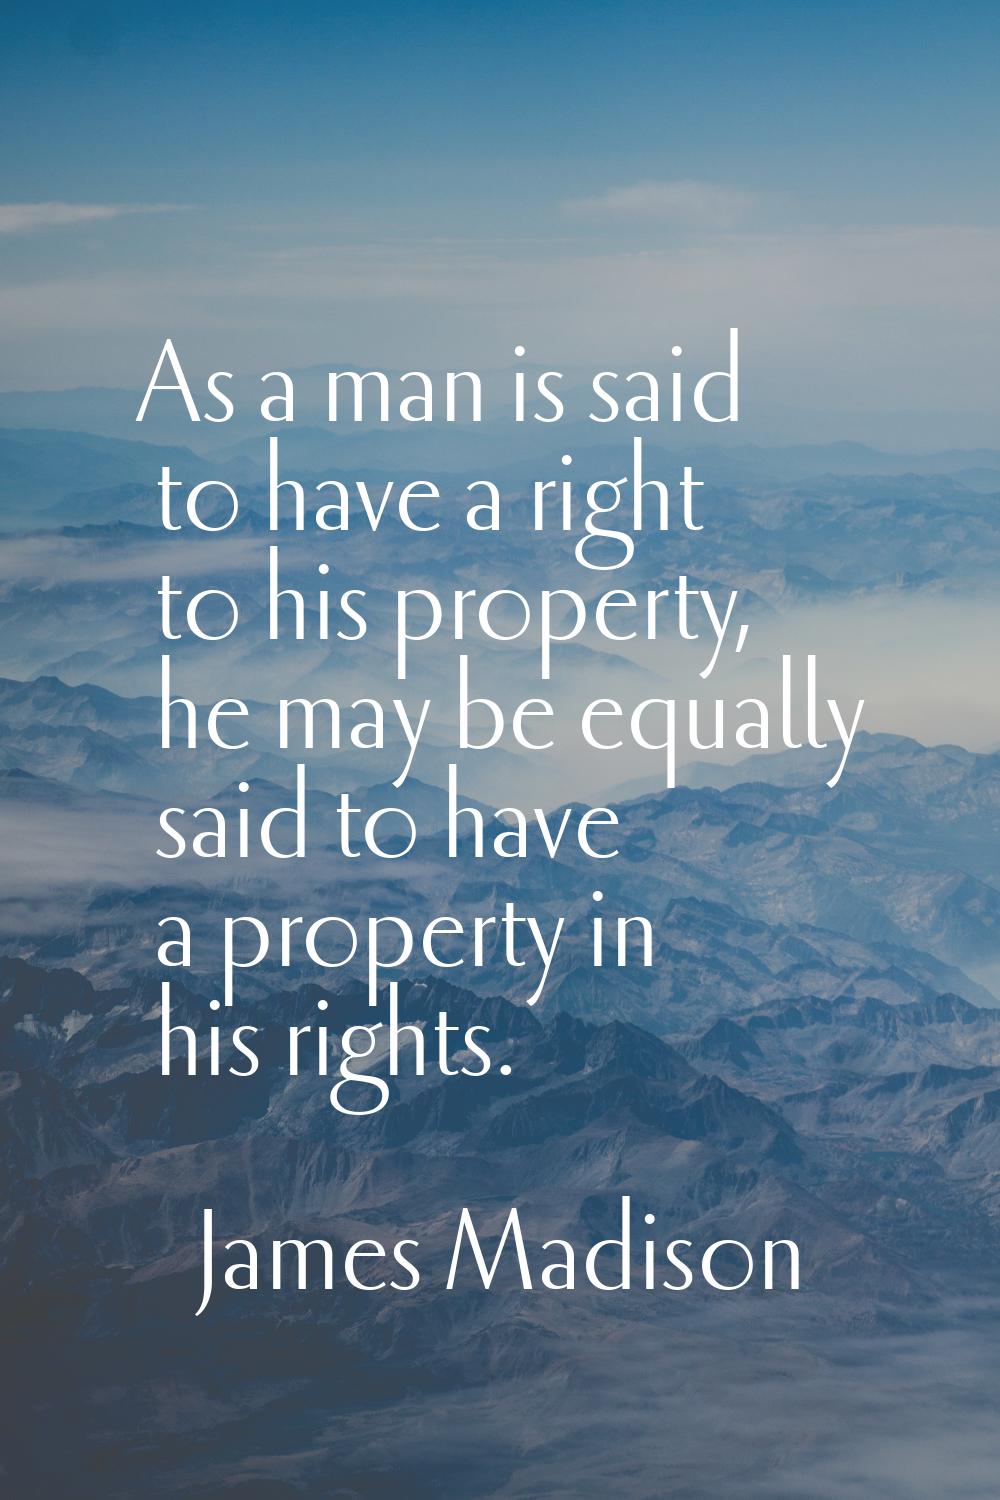 As a man is said to have a right to his property, he may be equally said to have a property in his 